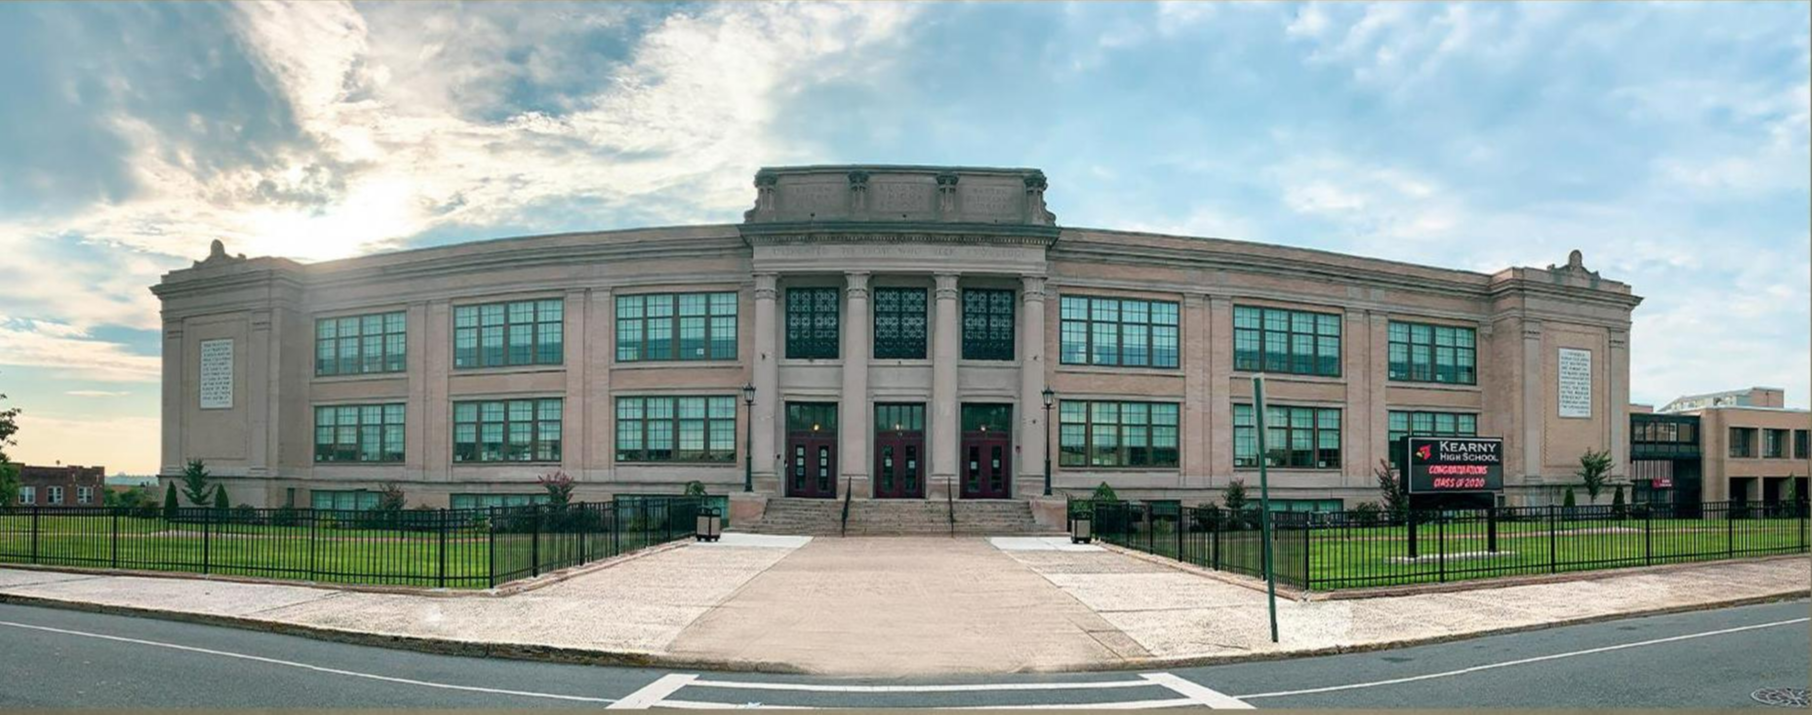  Kearny High School building - grey brick with large columns, brown windows and a green lawn